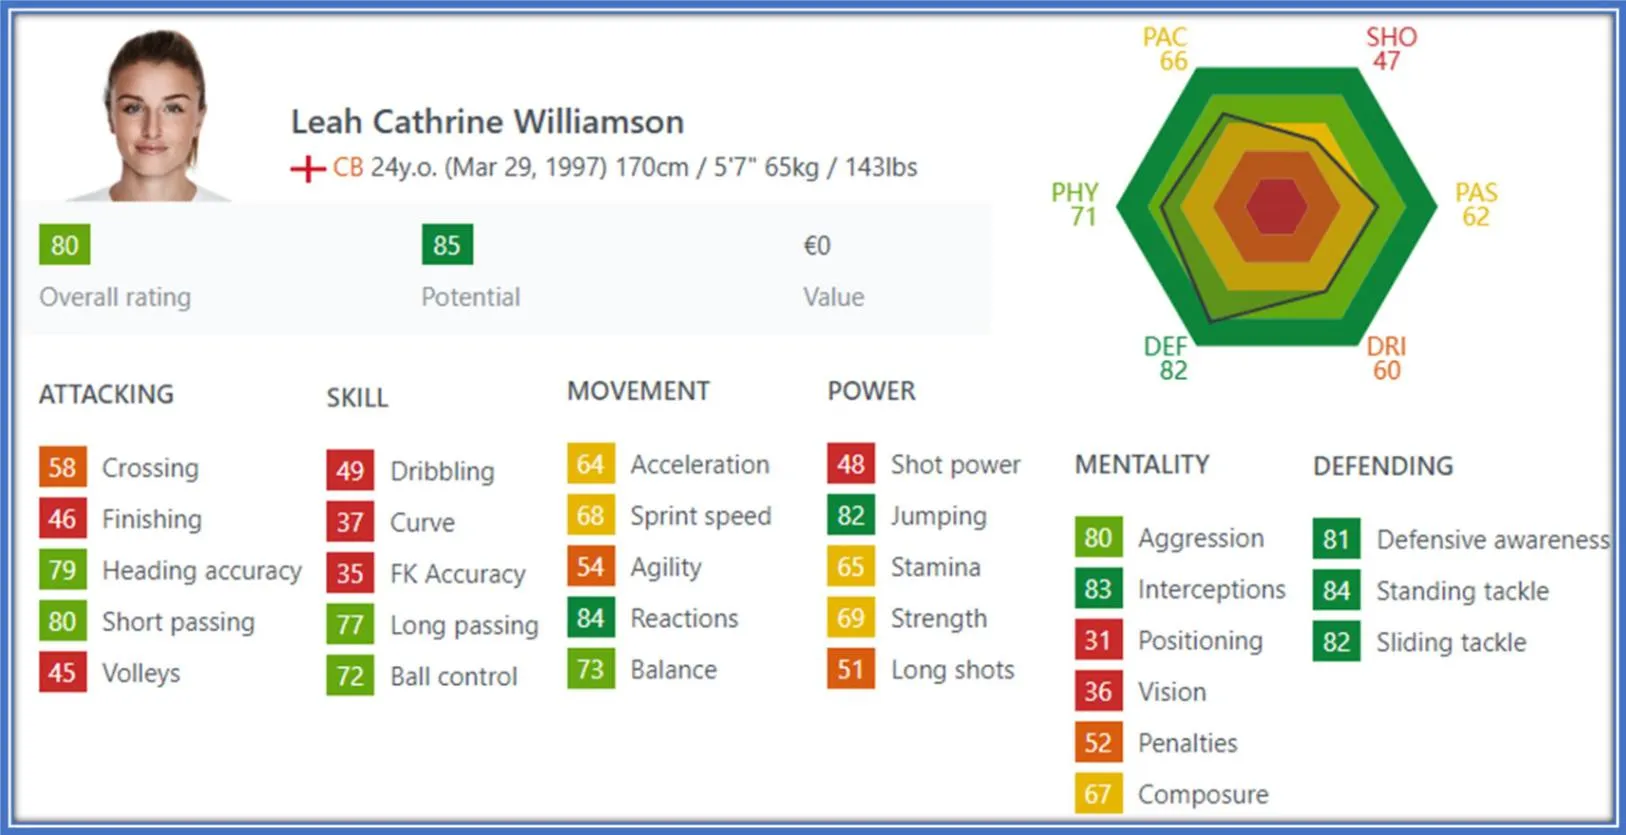 According to her FIFA rating, her reaction, jumping, defensive awareness, standing tackle, and sliding tackle cause her to excel as the best among other players.